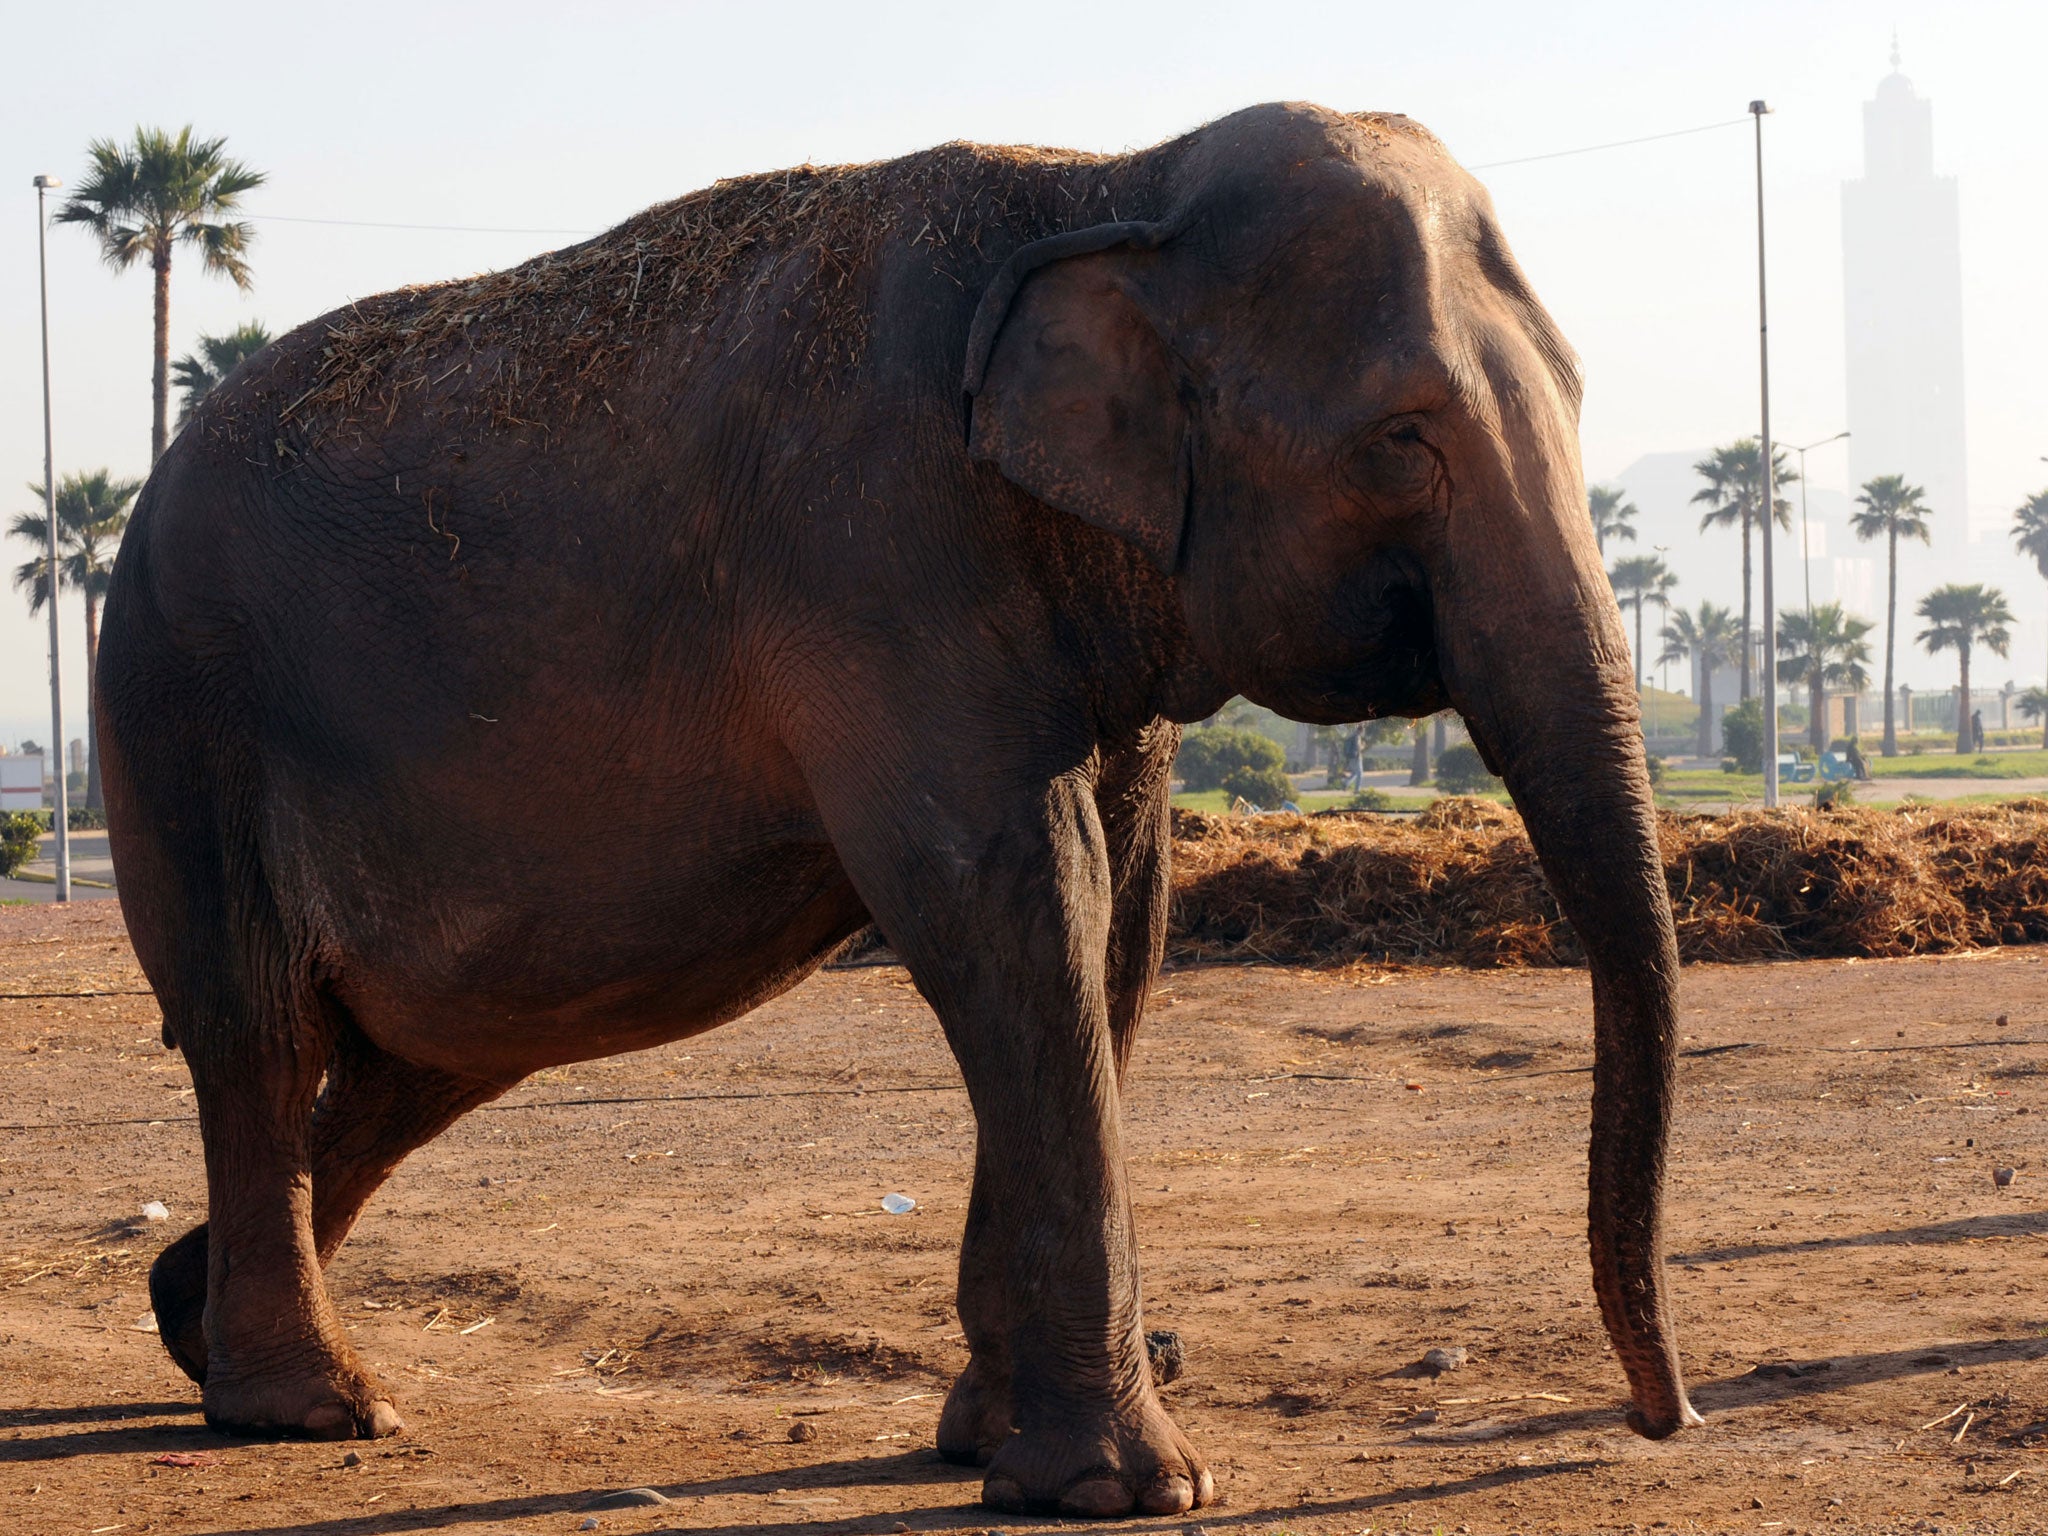 The man was playing petanque in the town square when the elephant trampled him